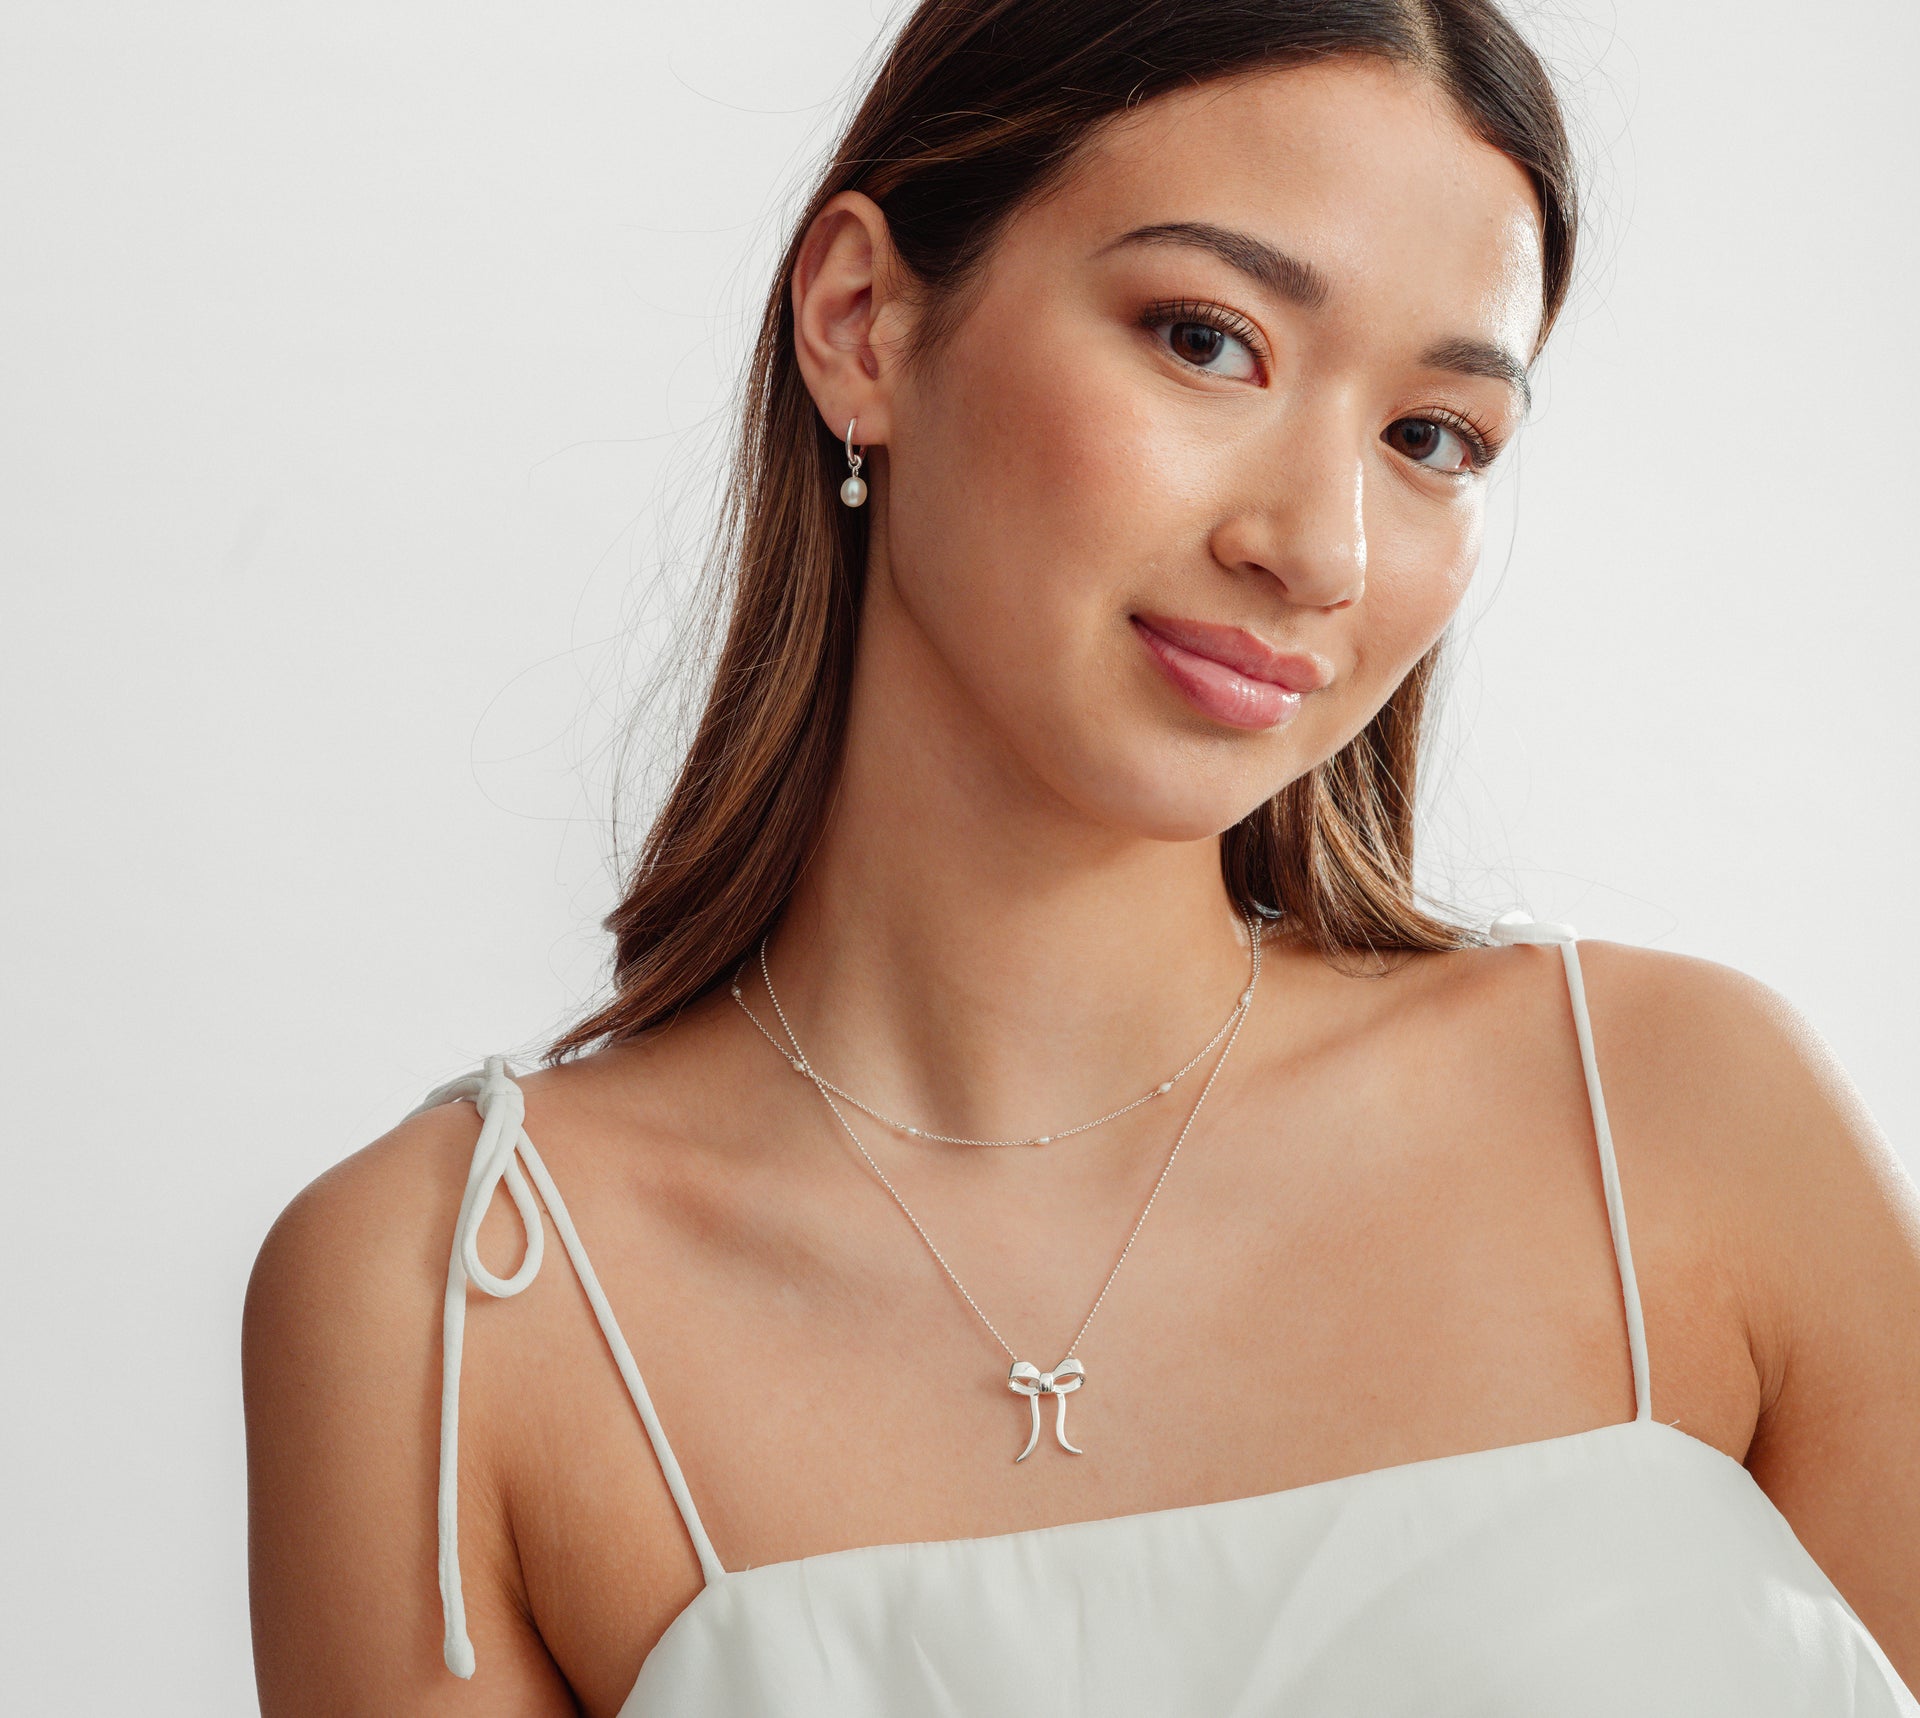 Girl with silver necklaces with pearls and bows and pearl earrings